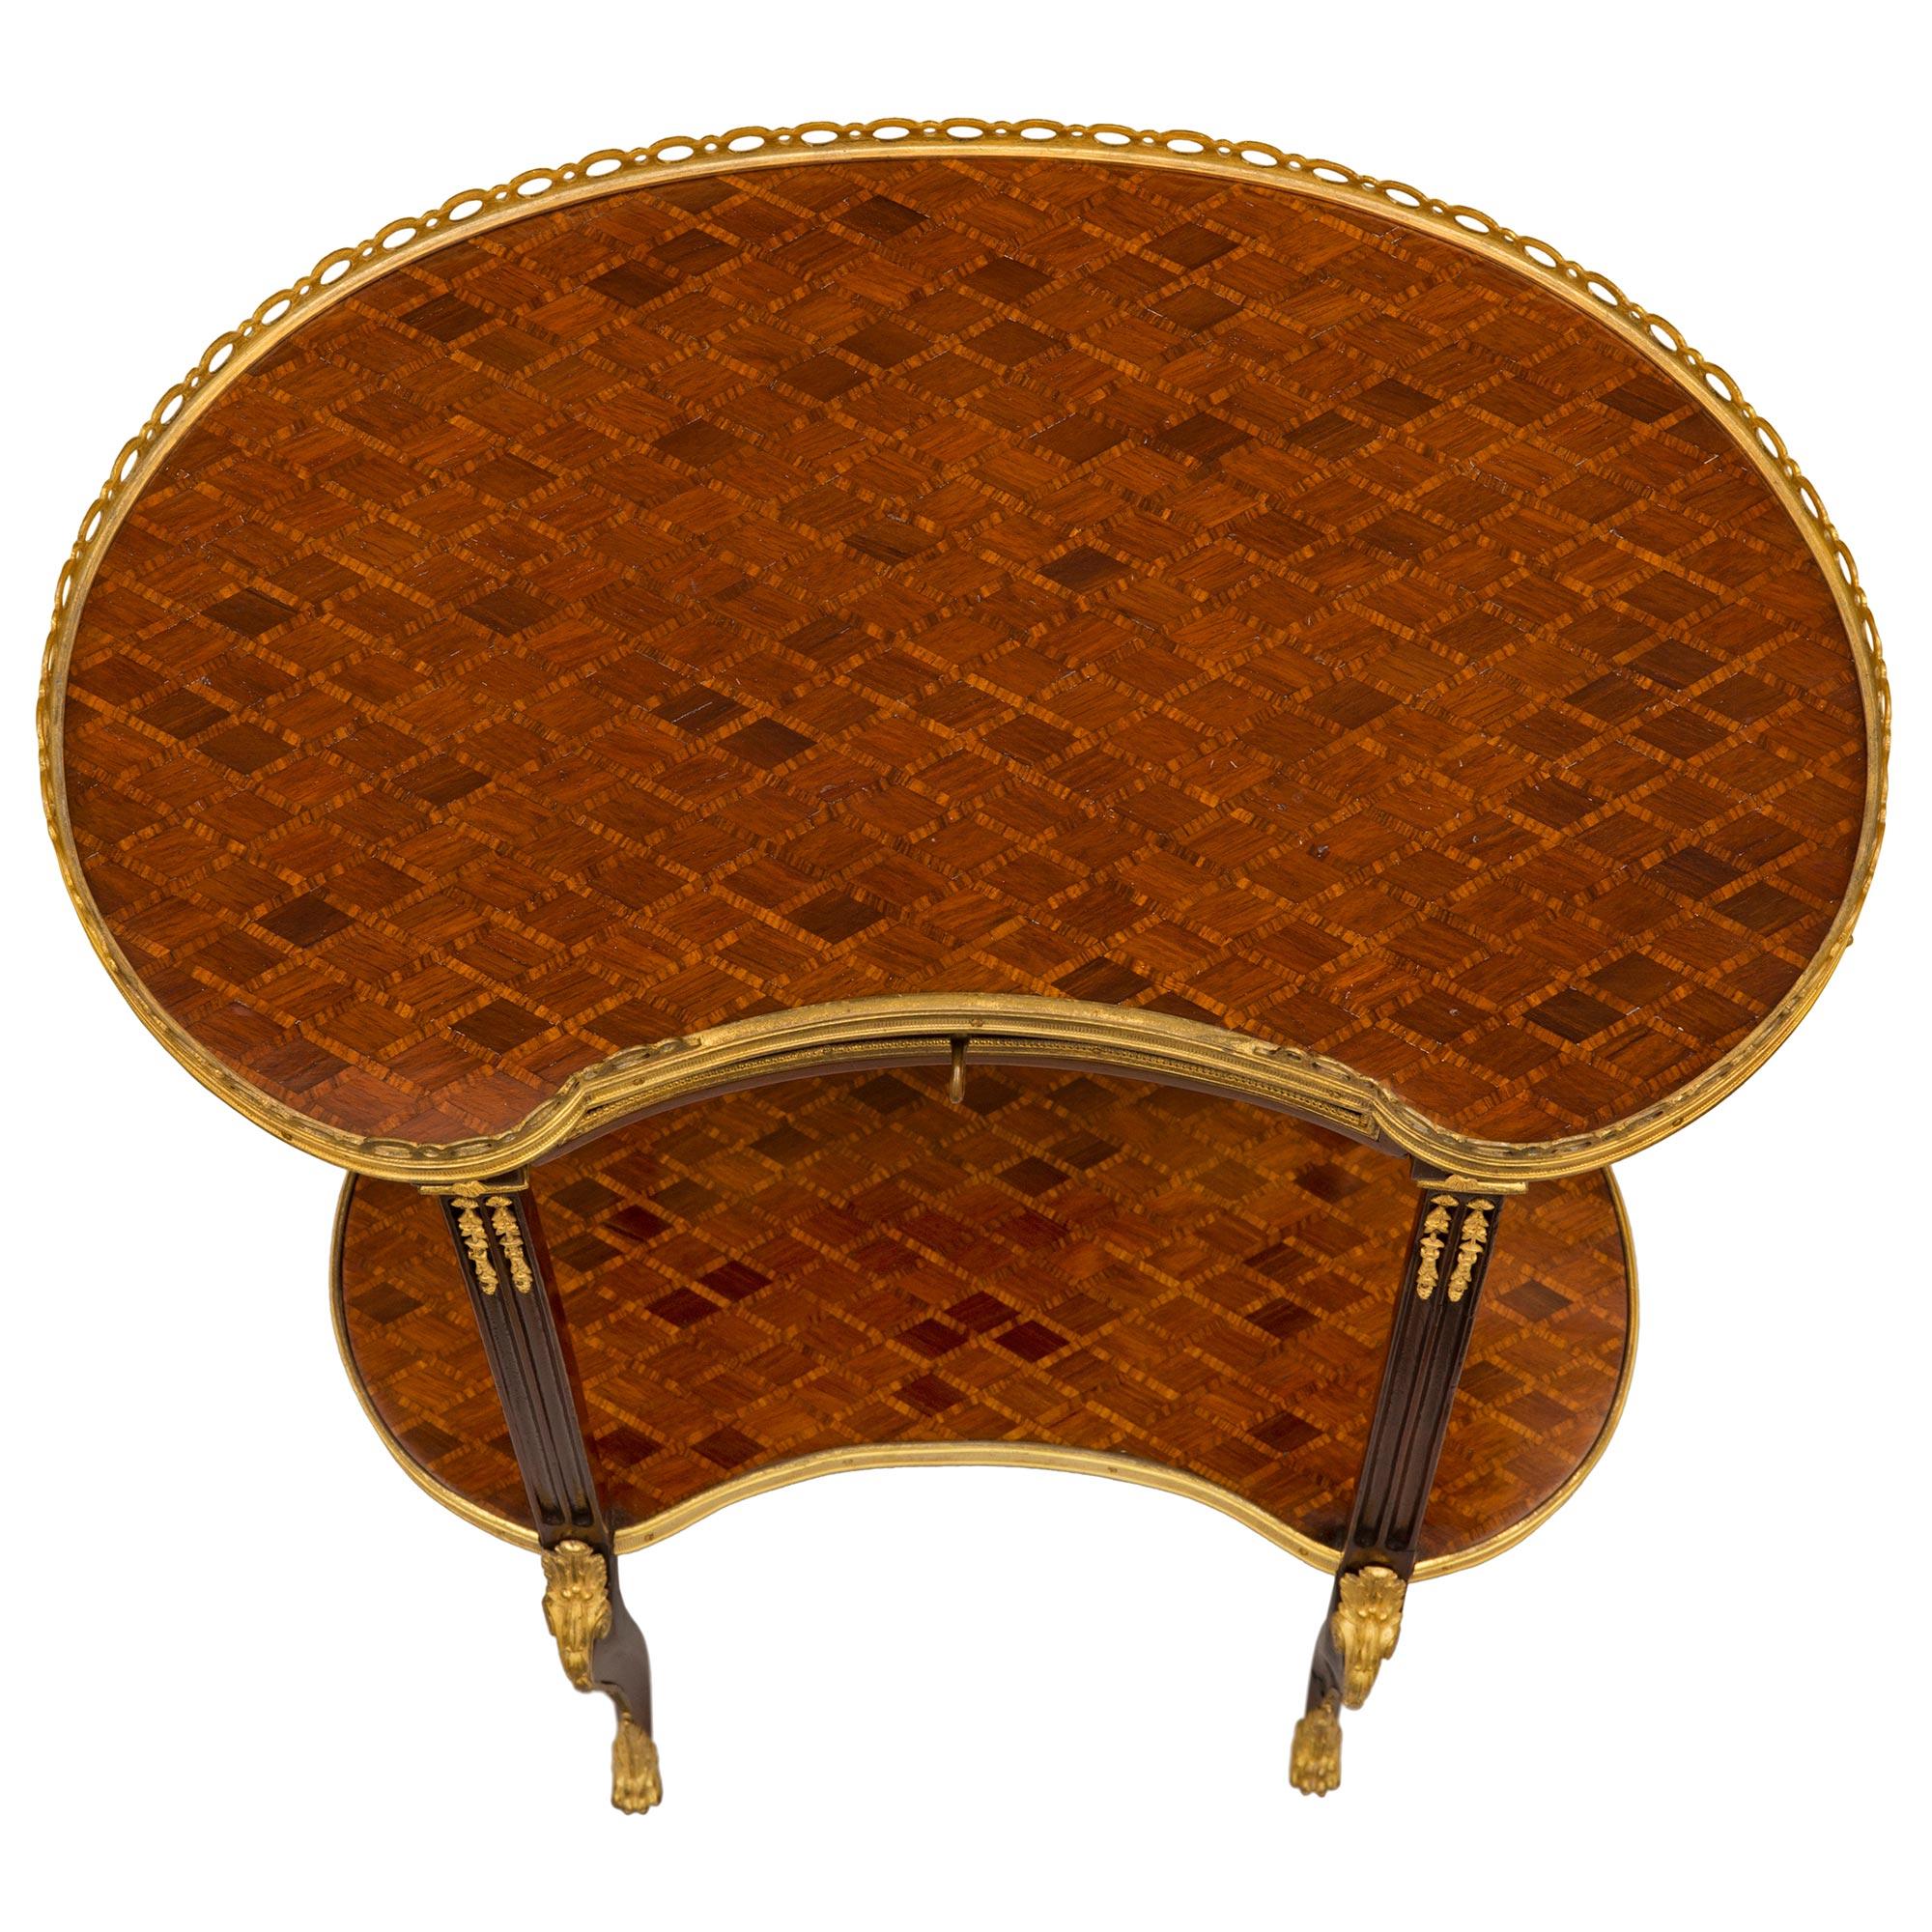 An exquisite French 19th century Transitional st. Mahogany, Kingwood, and ormolu side table. The two tiered kidney shaped table is raised by delicately scrolled legs with richly chased ormolu paw shaped feet and a charming tapered chute leading to